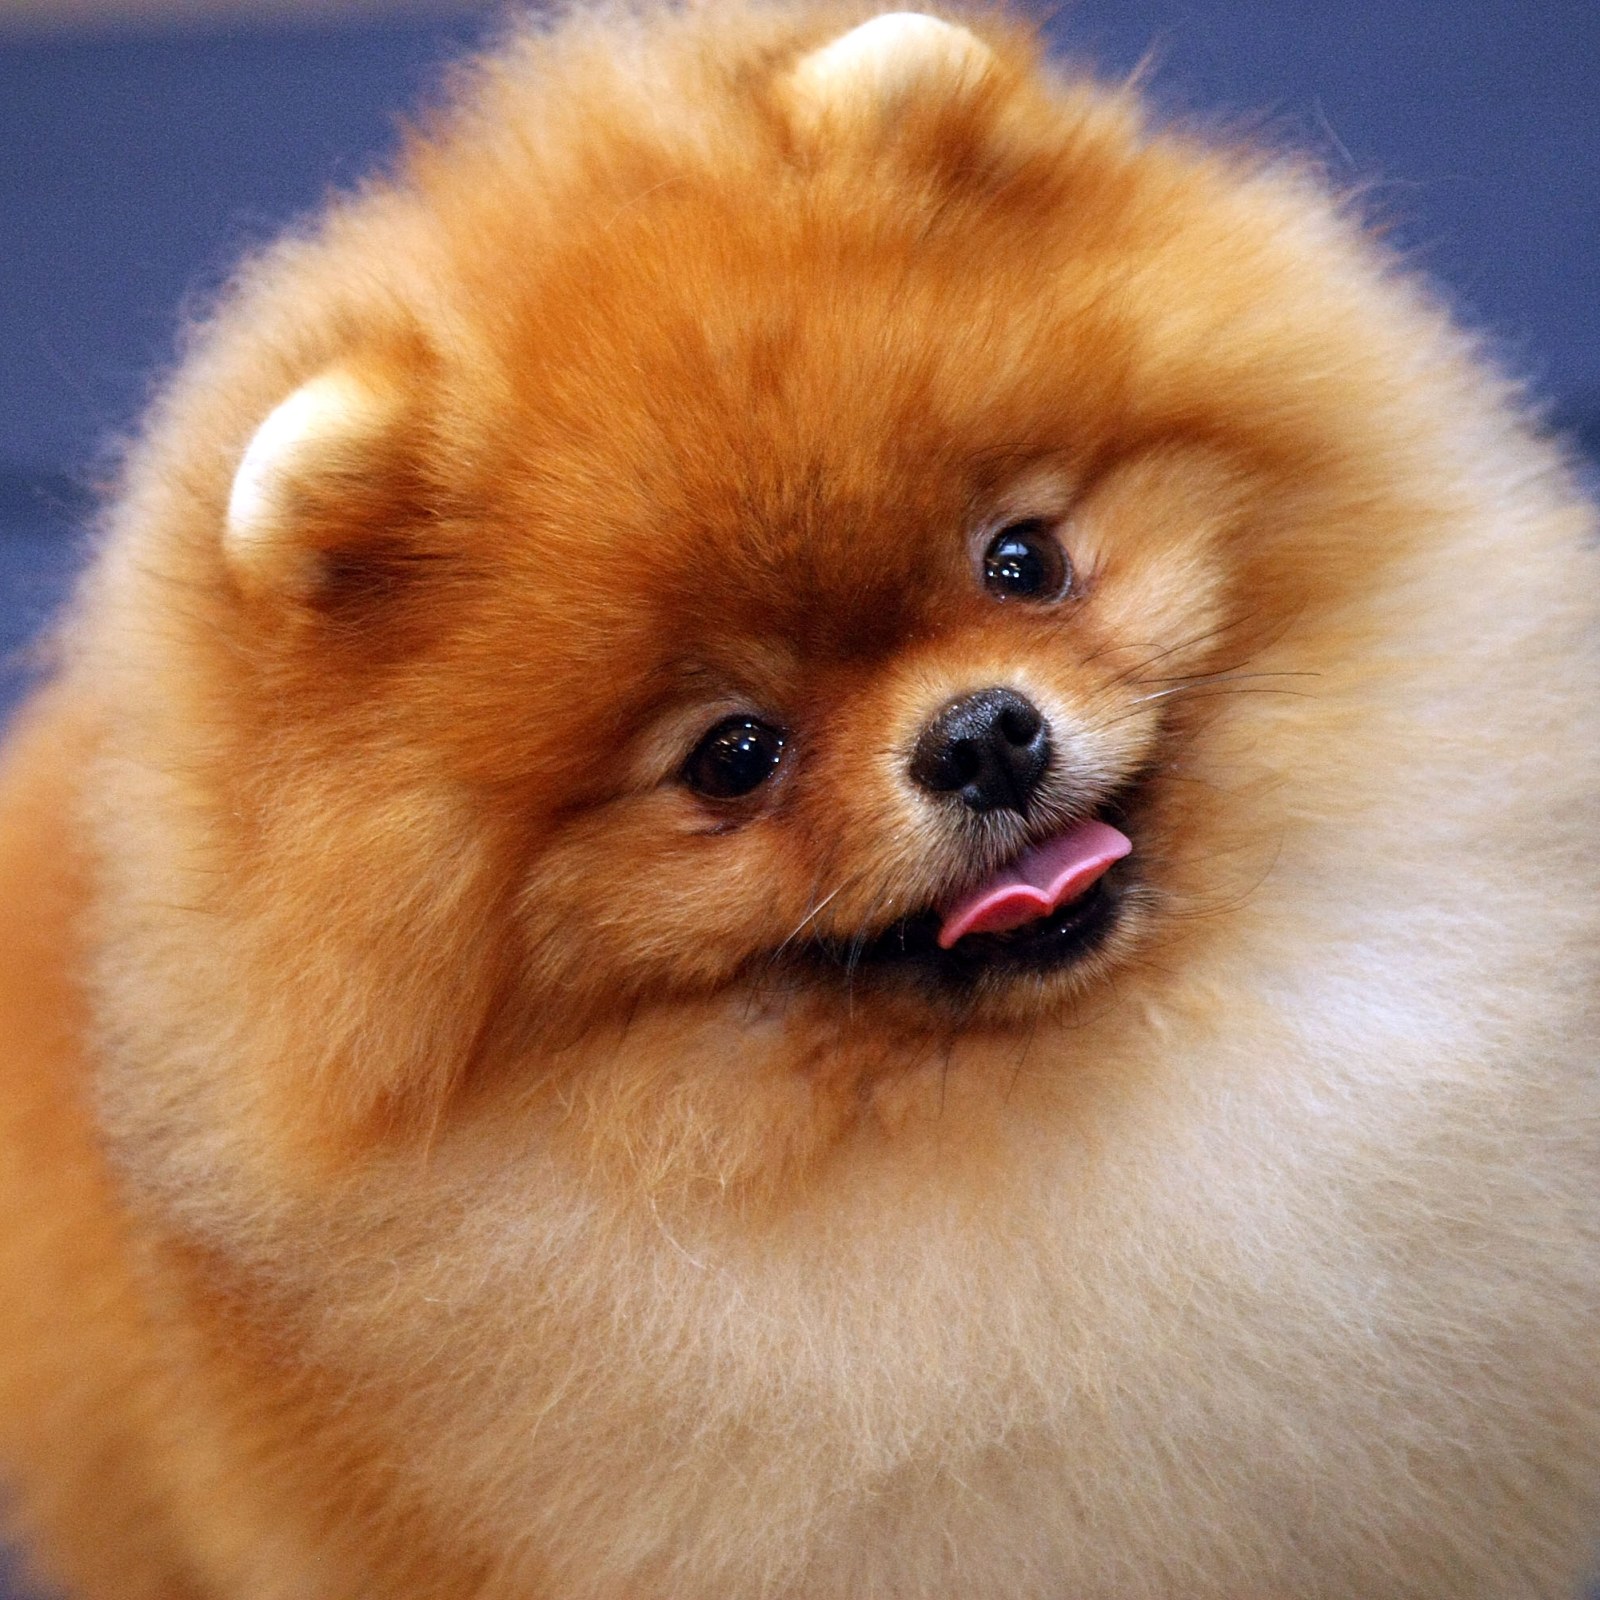 Pomeranian Puppy Looks Unrecognizable With Wet Hair in Funny Viral Video